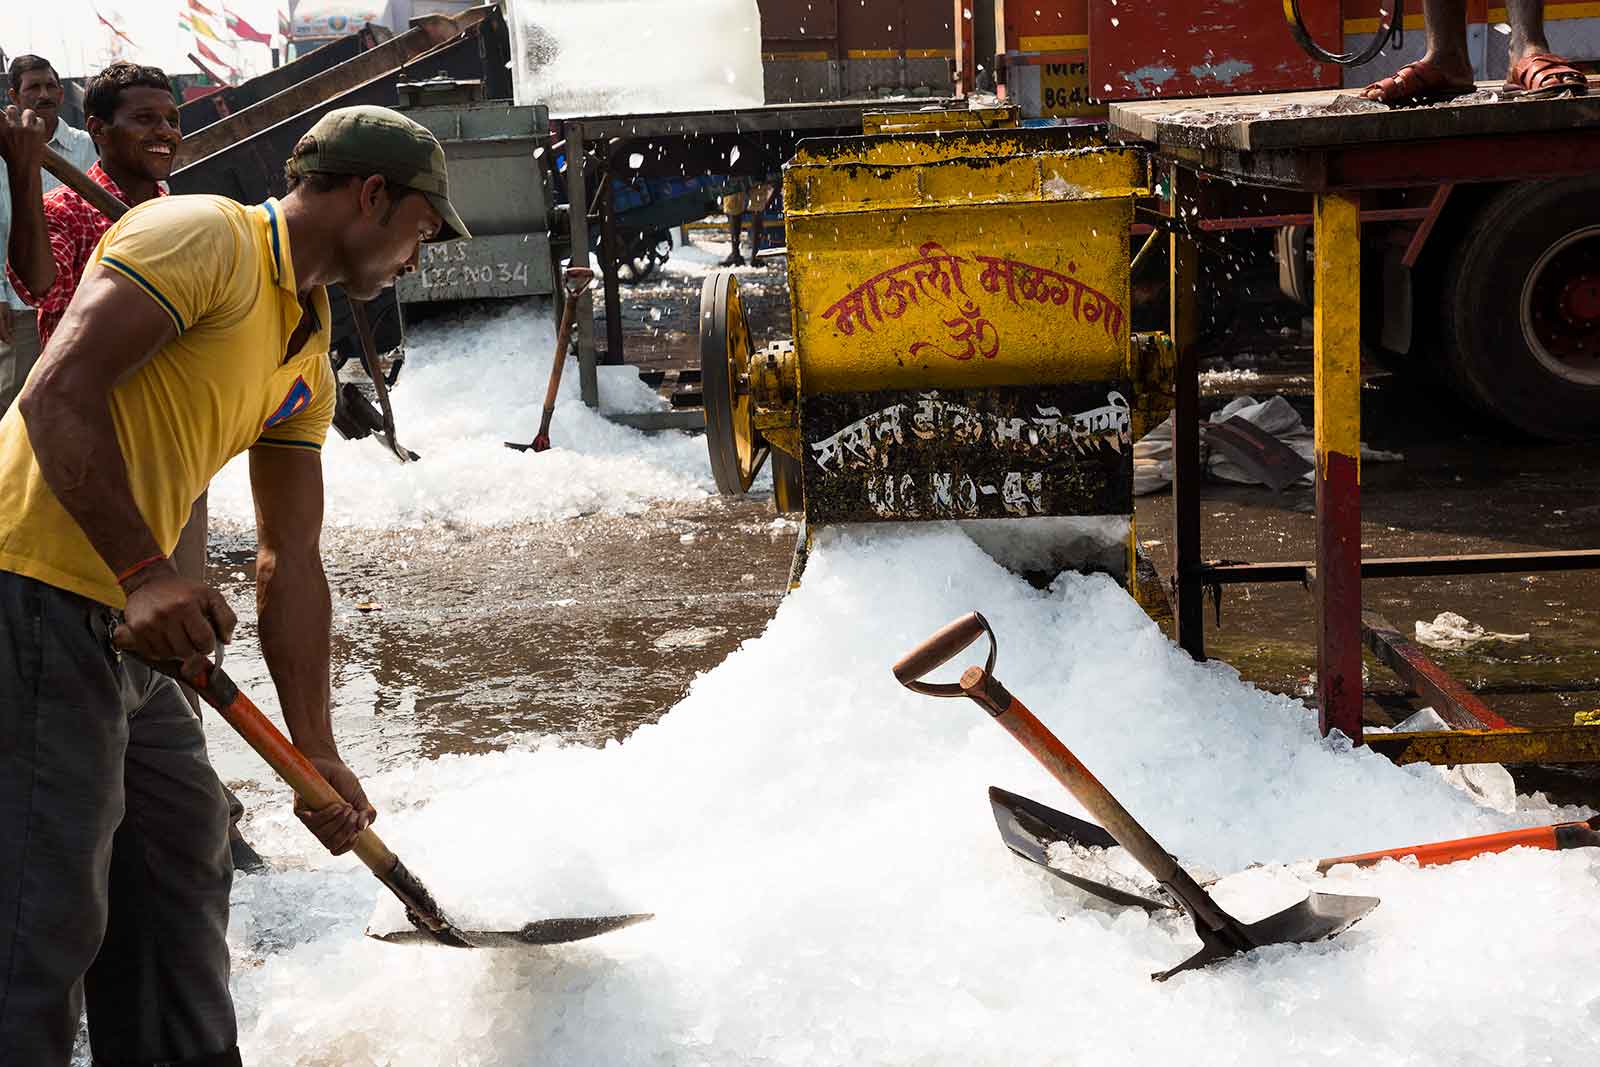 Where there's fresh fish, there needs to be crushed ice. While fish is unloaded off the boats, tons of ice is crushed to keep the fish fresh at the Sassoon Docks.